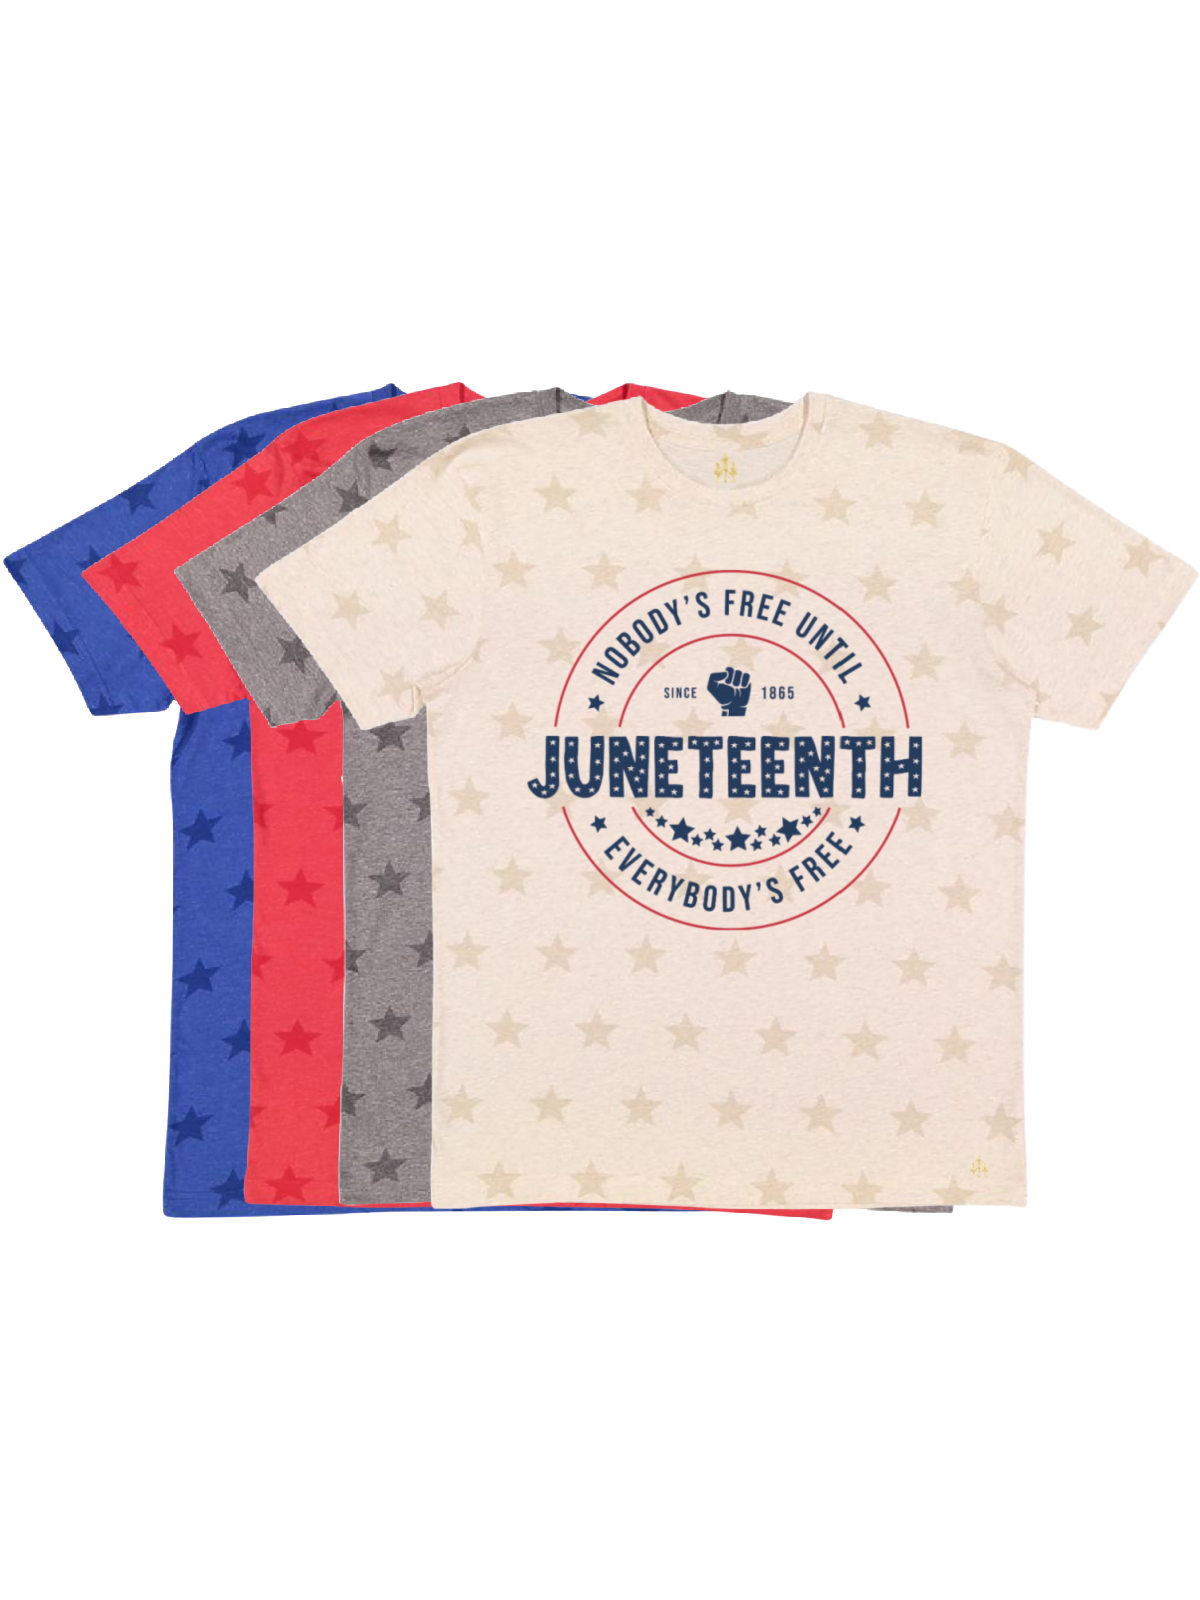 Nobody's Free Until Everybody's Free Adult Juneteenth Shirt - Red, Blue, Gray, & Natural Stars